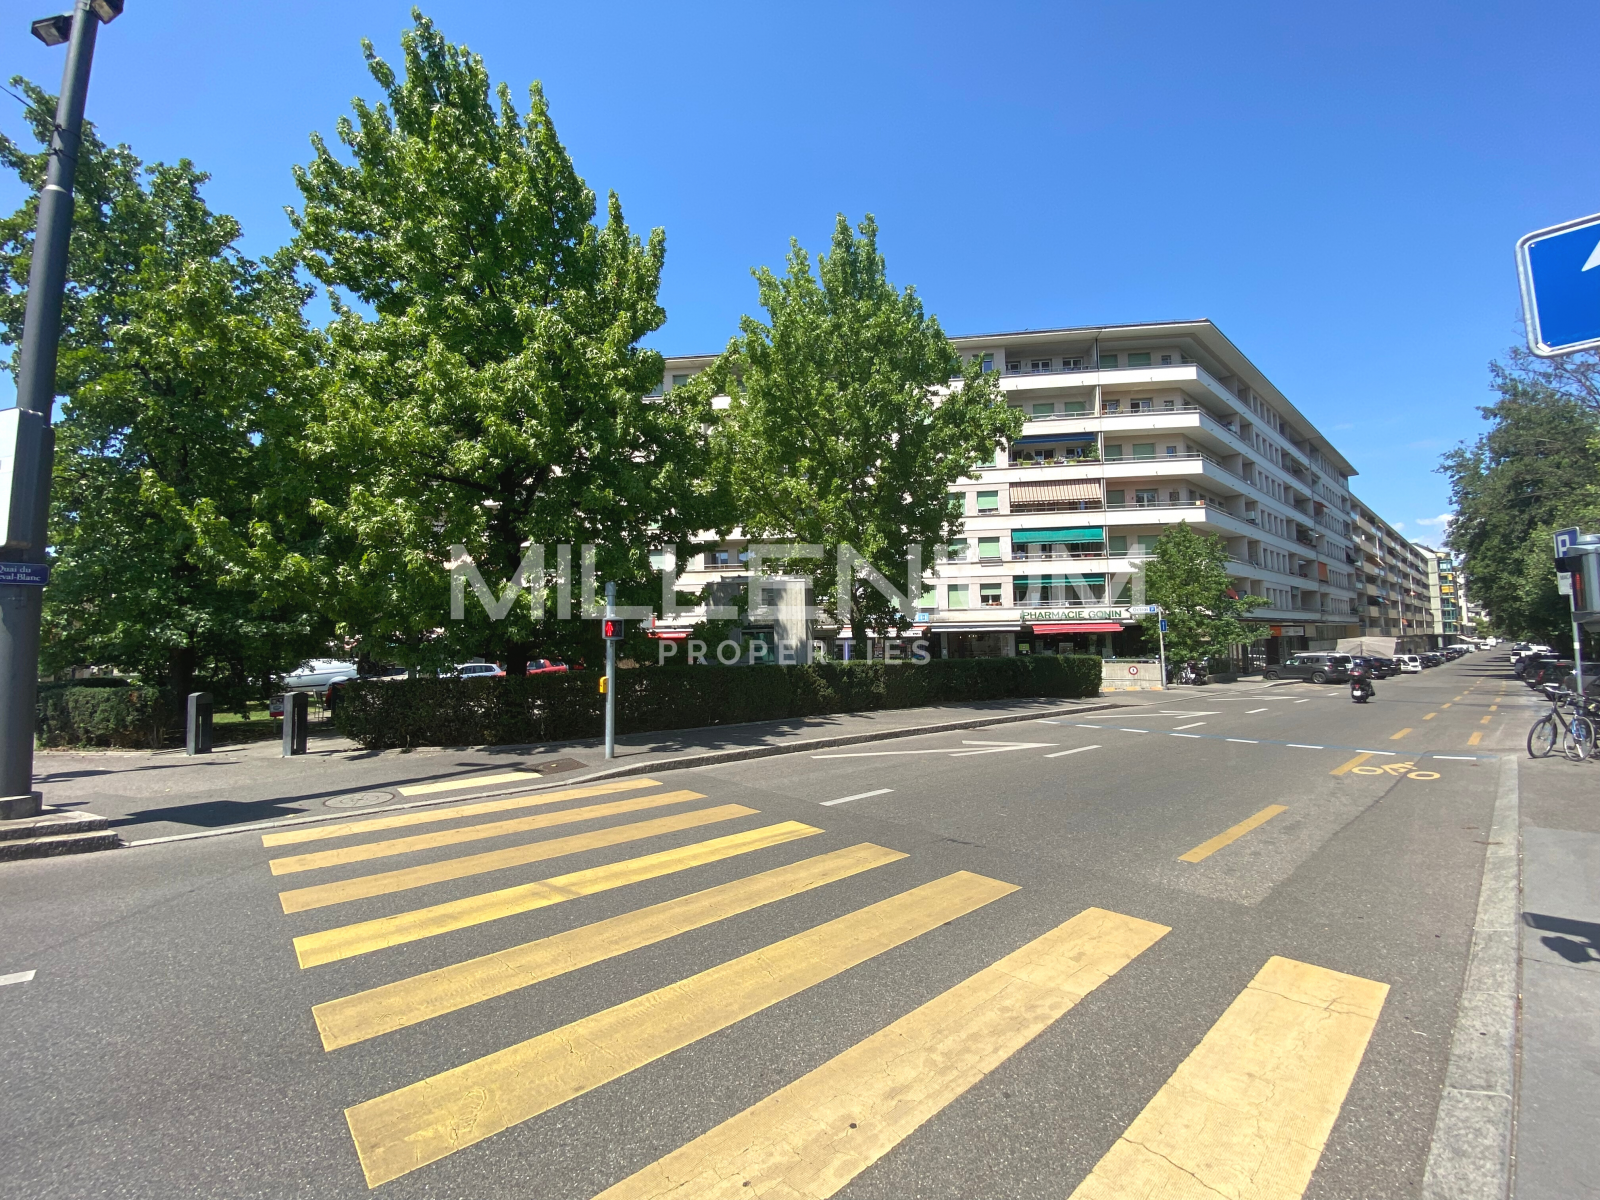 prix-immobilier-acacias-carouge-geneve.png